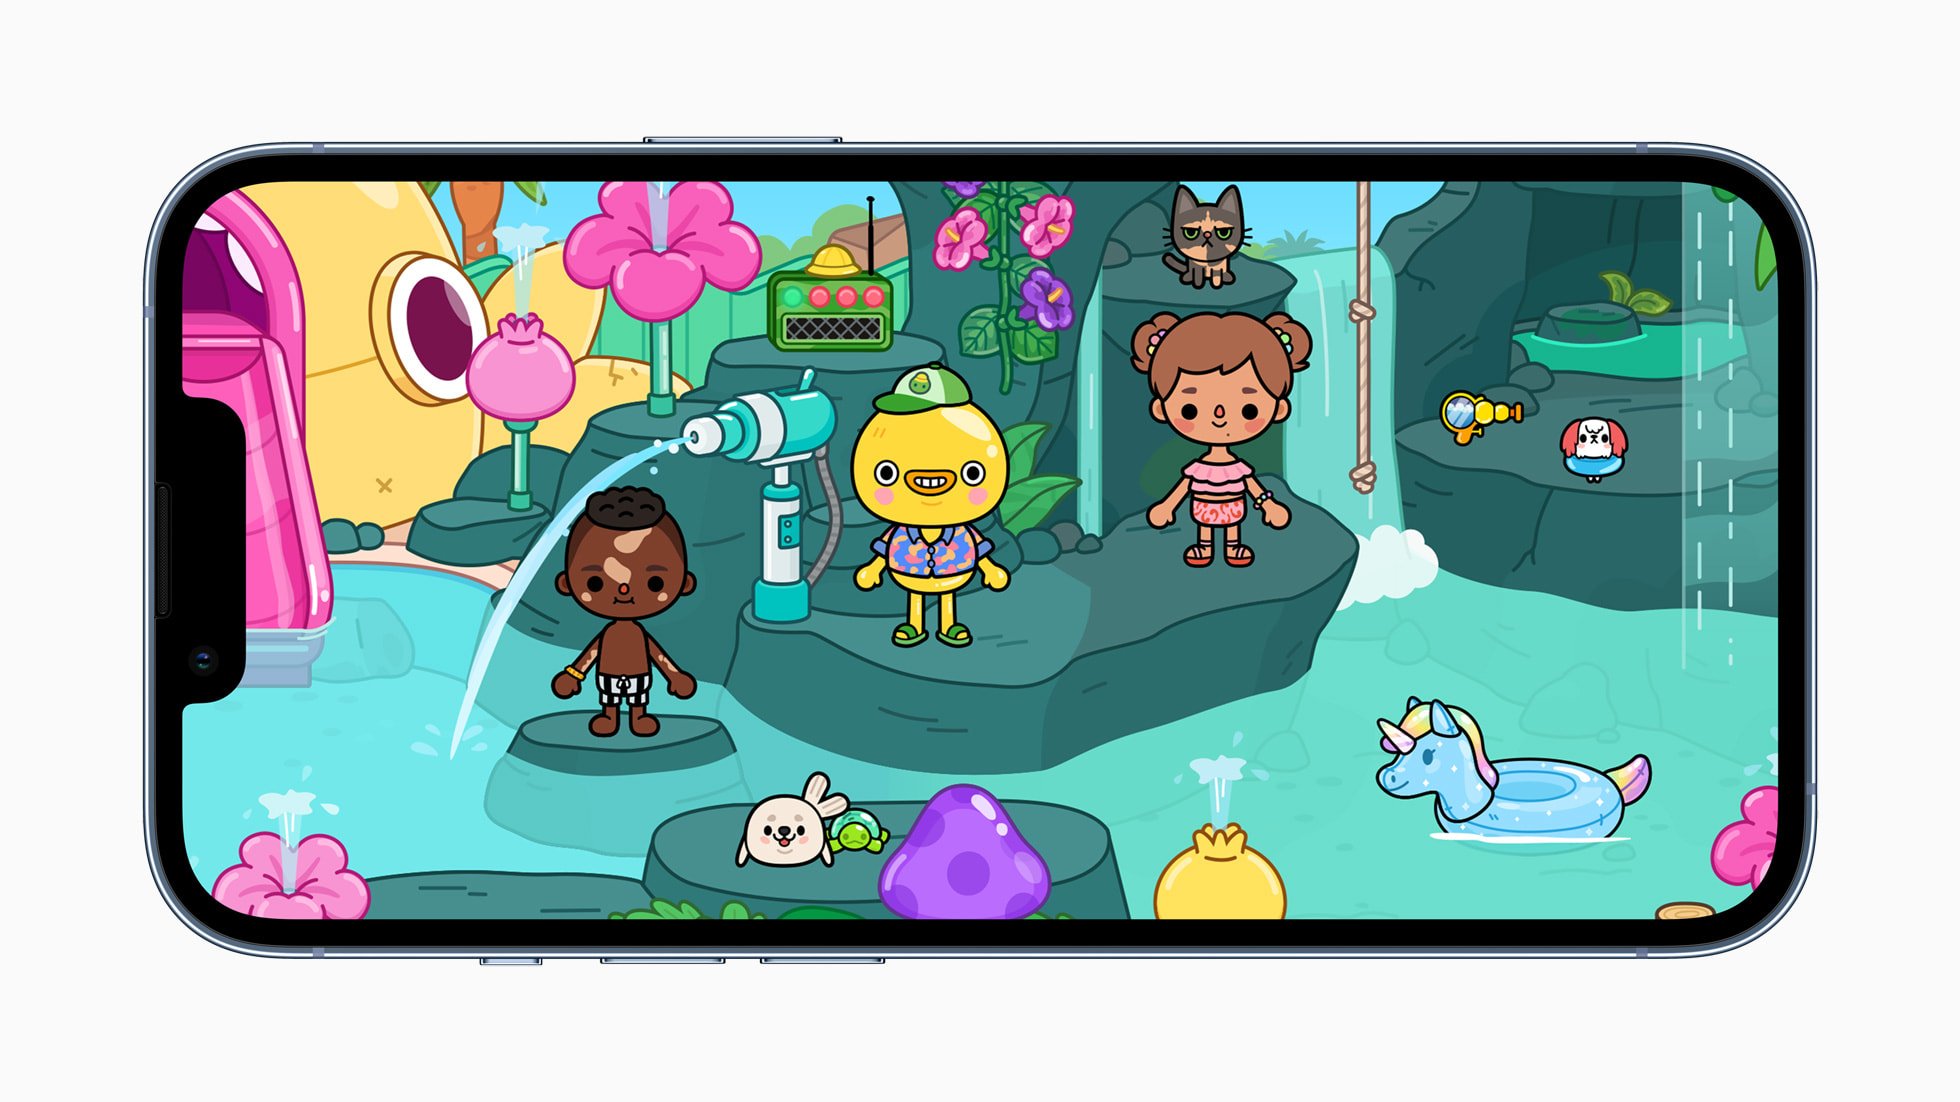 iPhone App of the Year: Toca Life World, from Toca Boca.